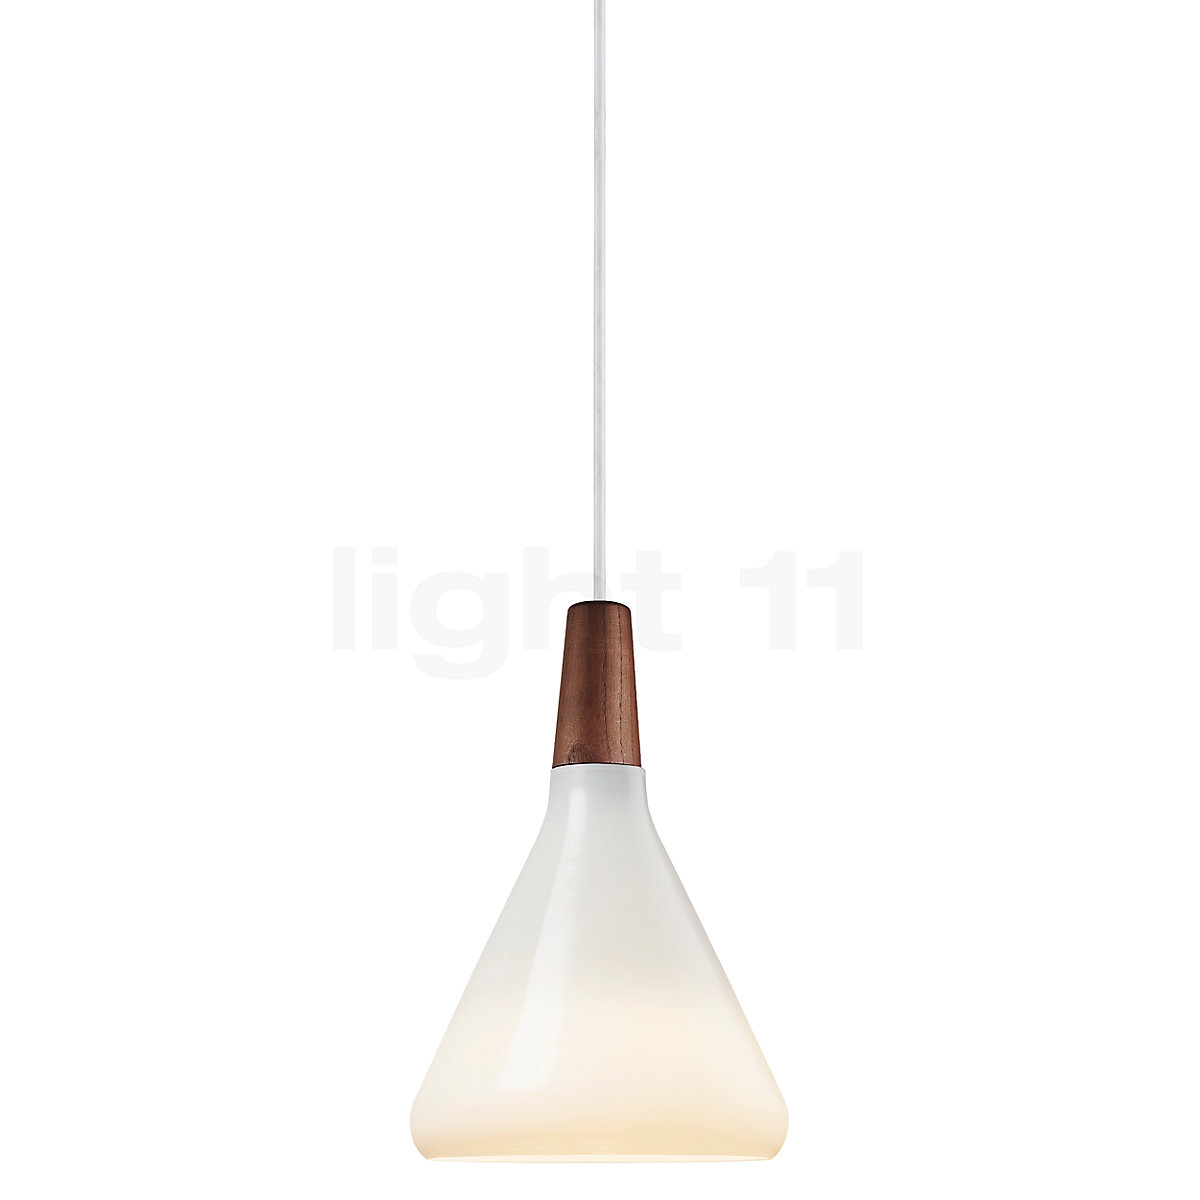 Buy Design for the Pendant Nori at Light People